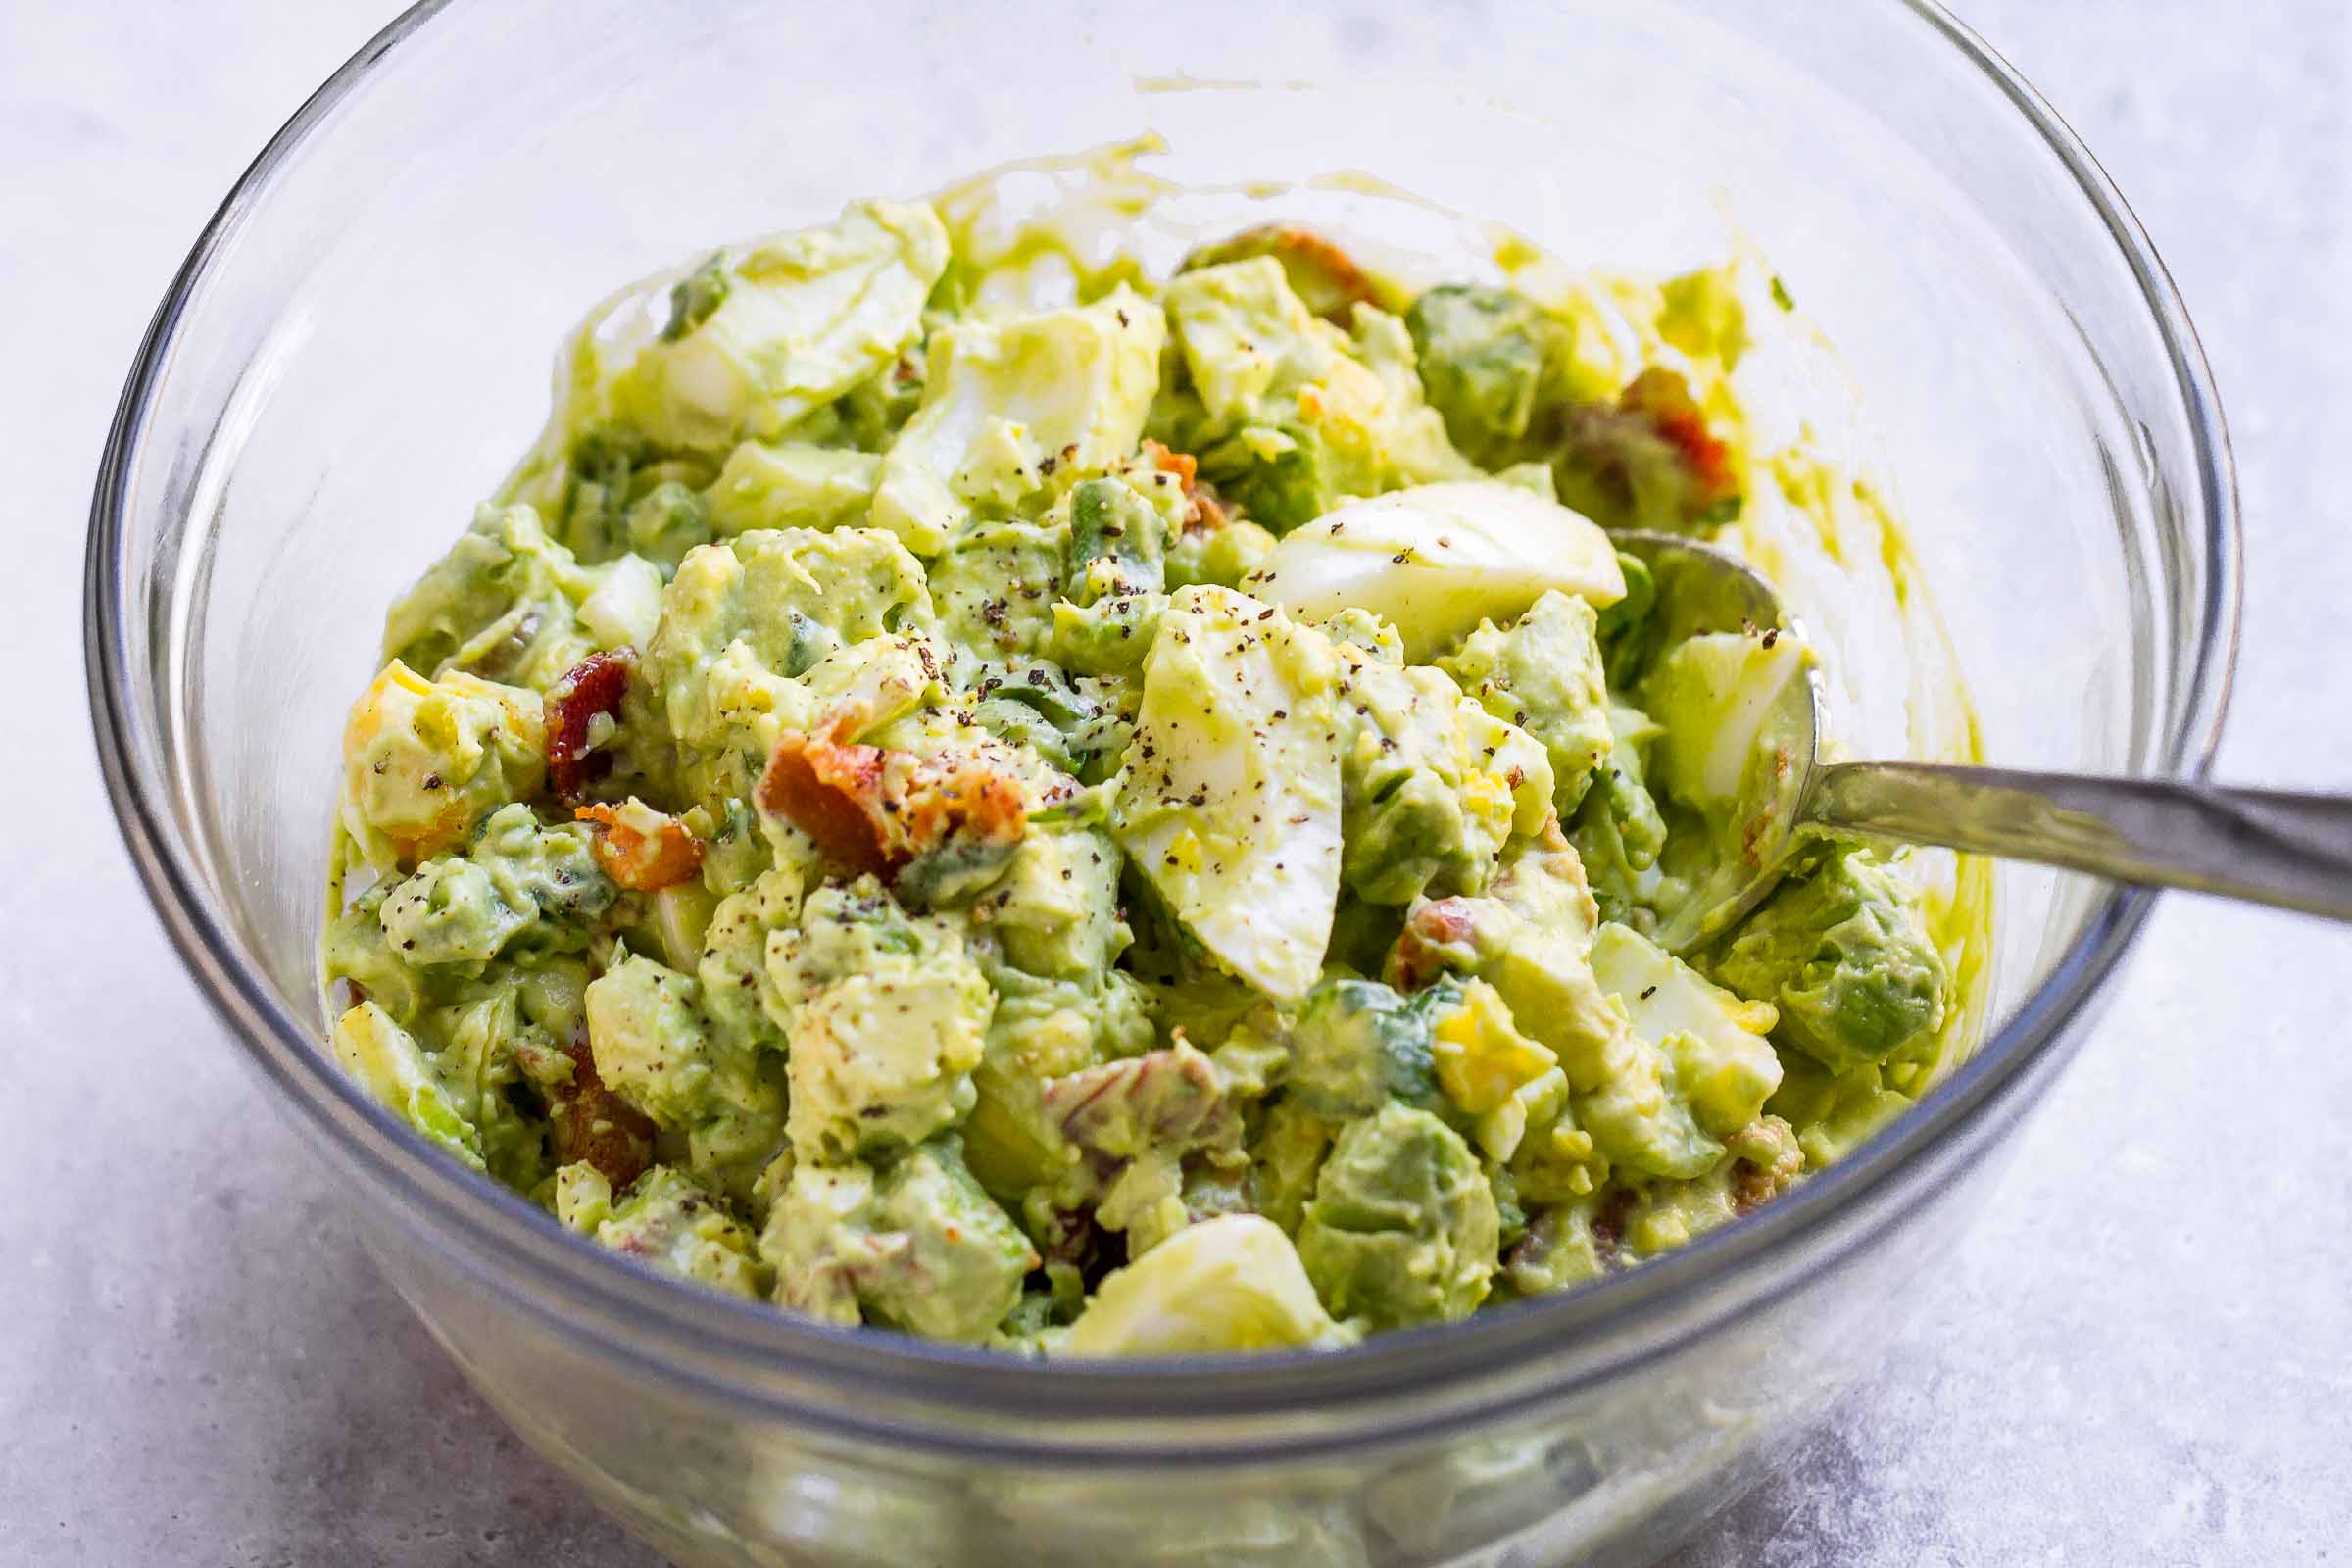 These 15 Healthy Avocado Salads Will Fill You Up With Energy